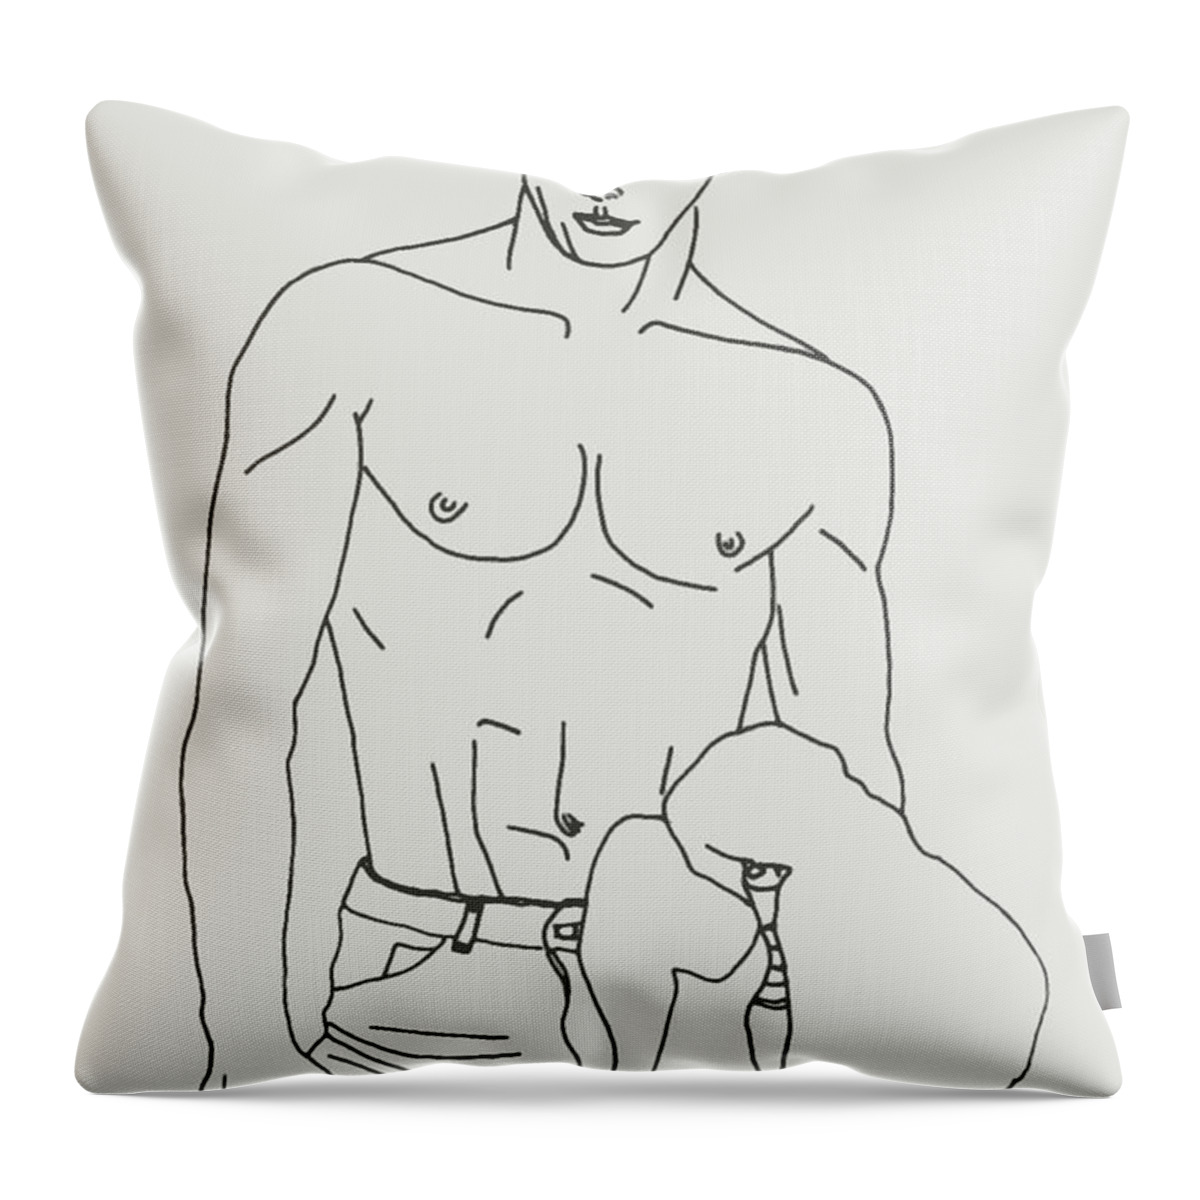 Shirtless Throw Pillow featuring the drawing Shirtless Young Male by Sheri Parris